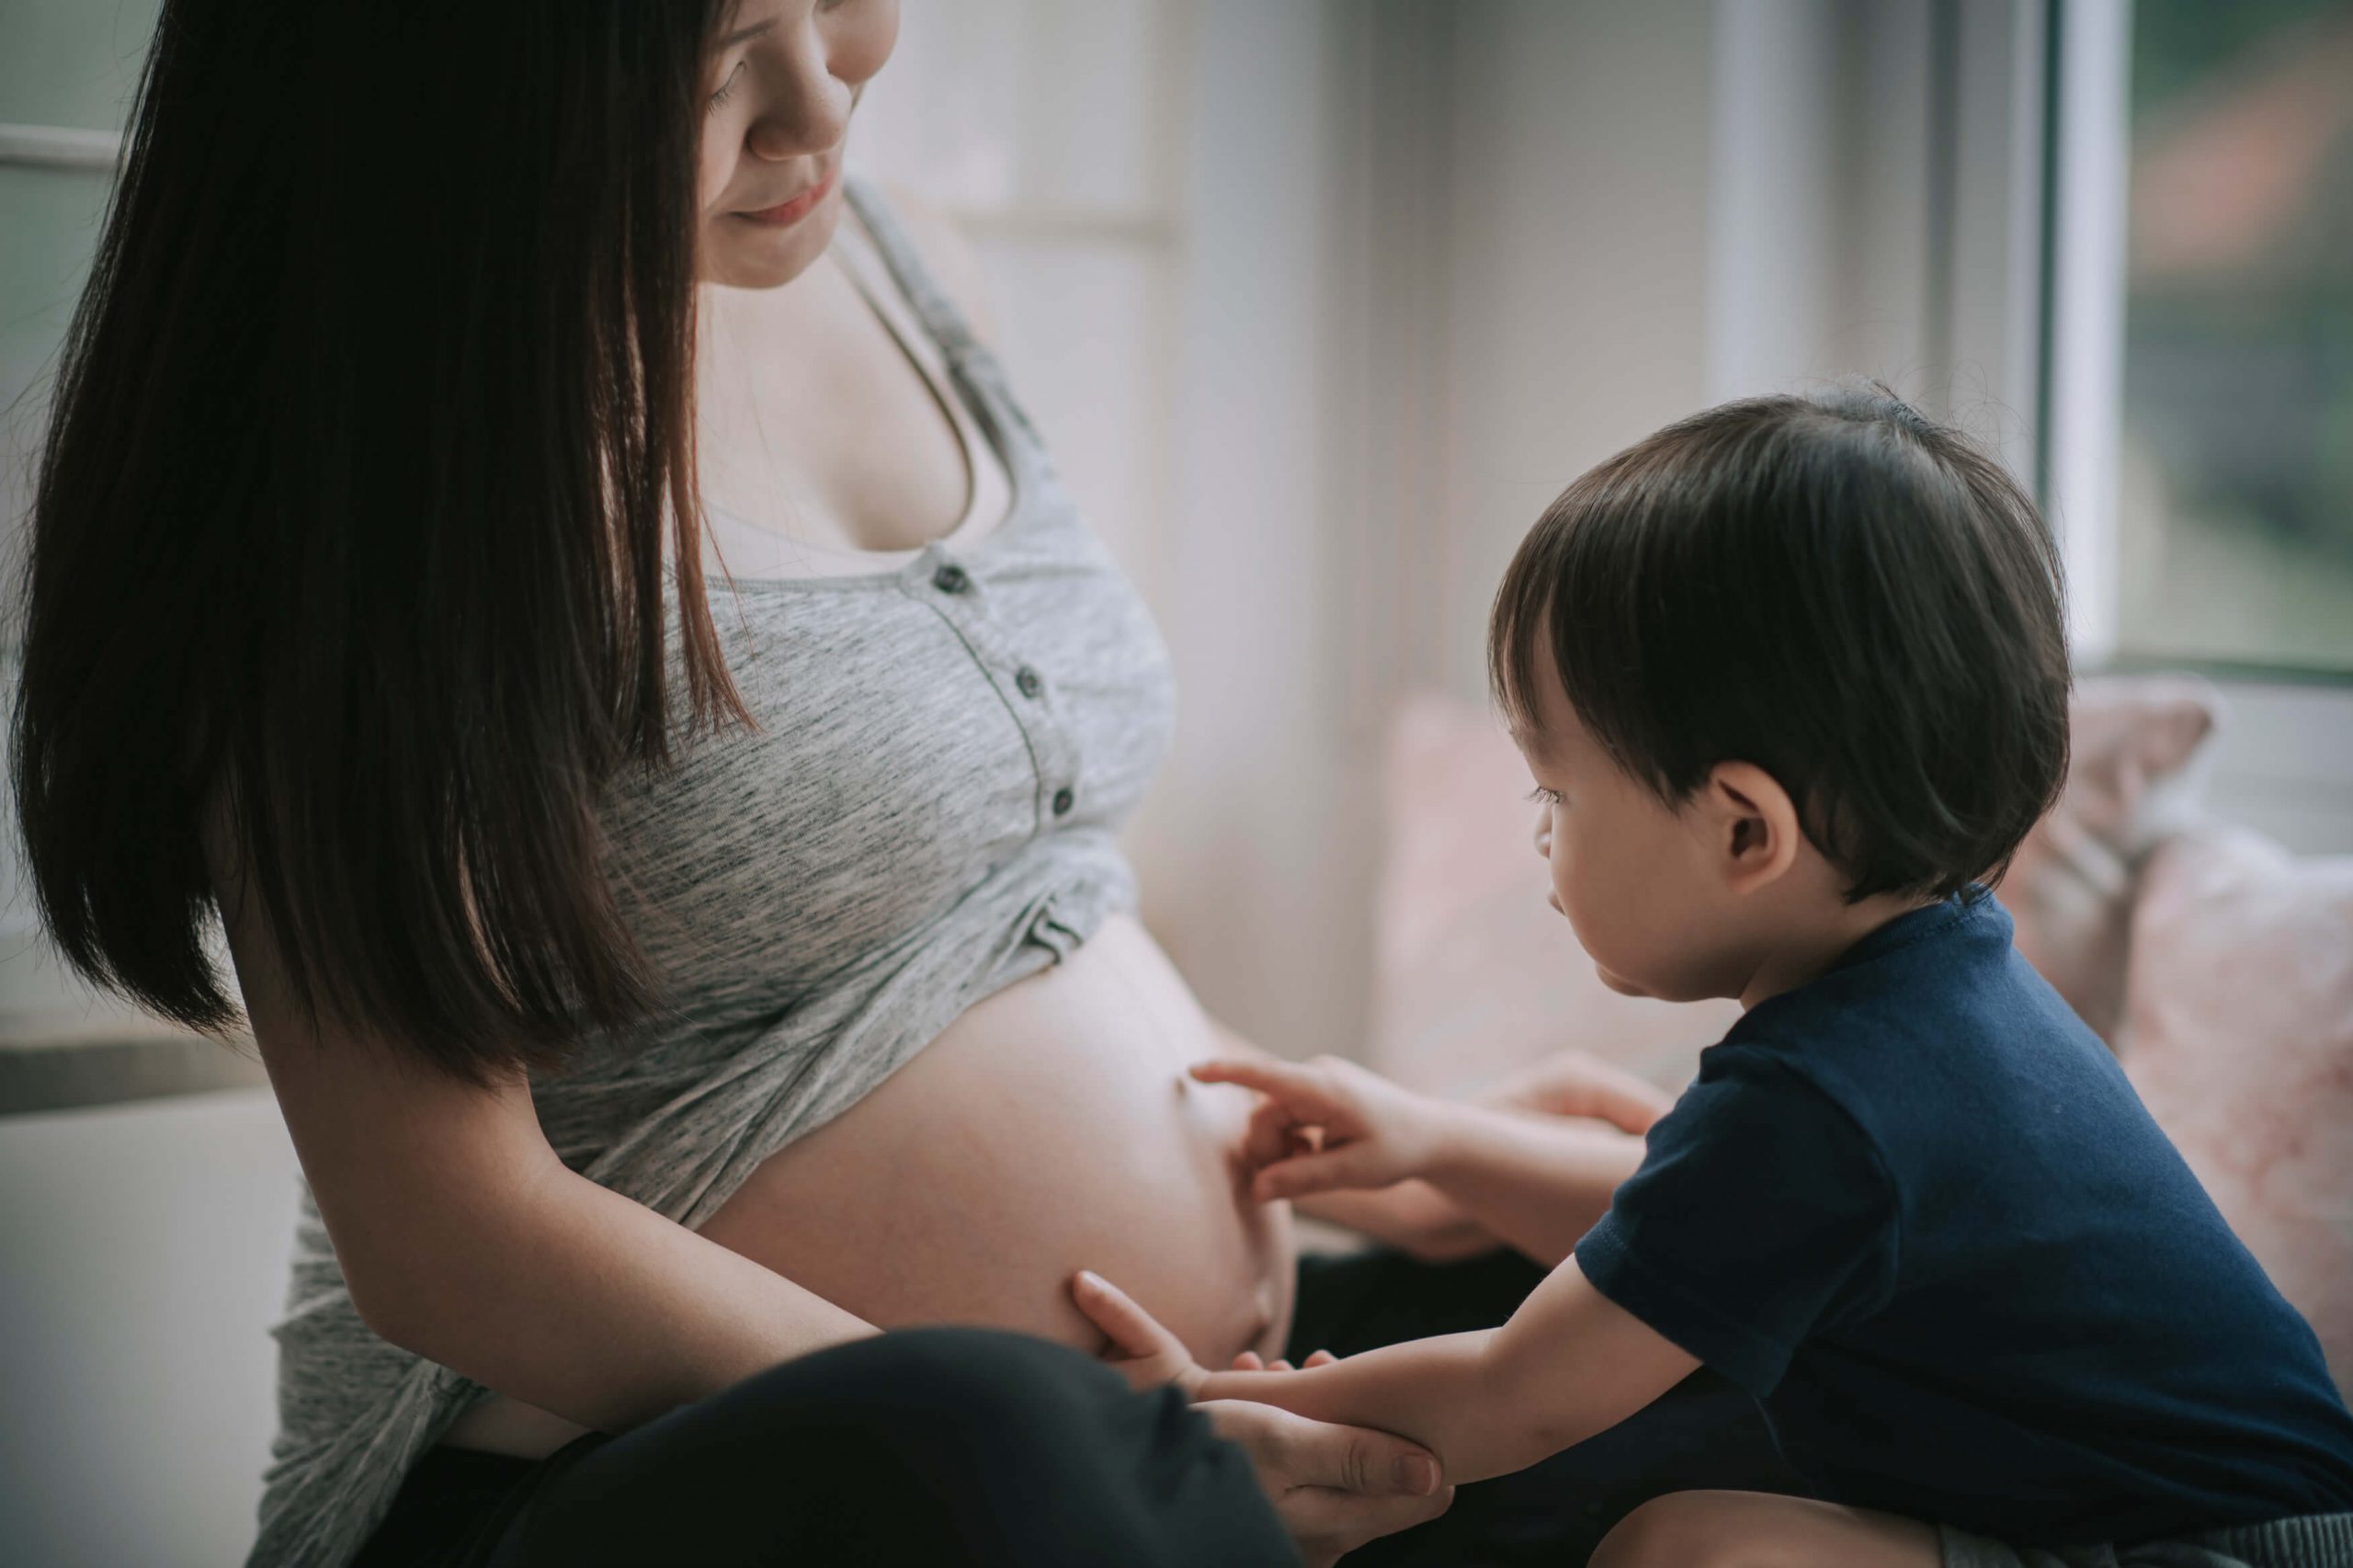 Second Pregnancy: What to Expect from Pregnancy with the Second Baby